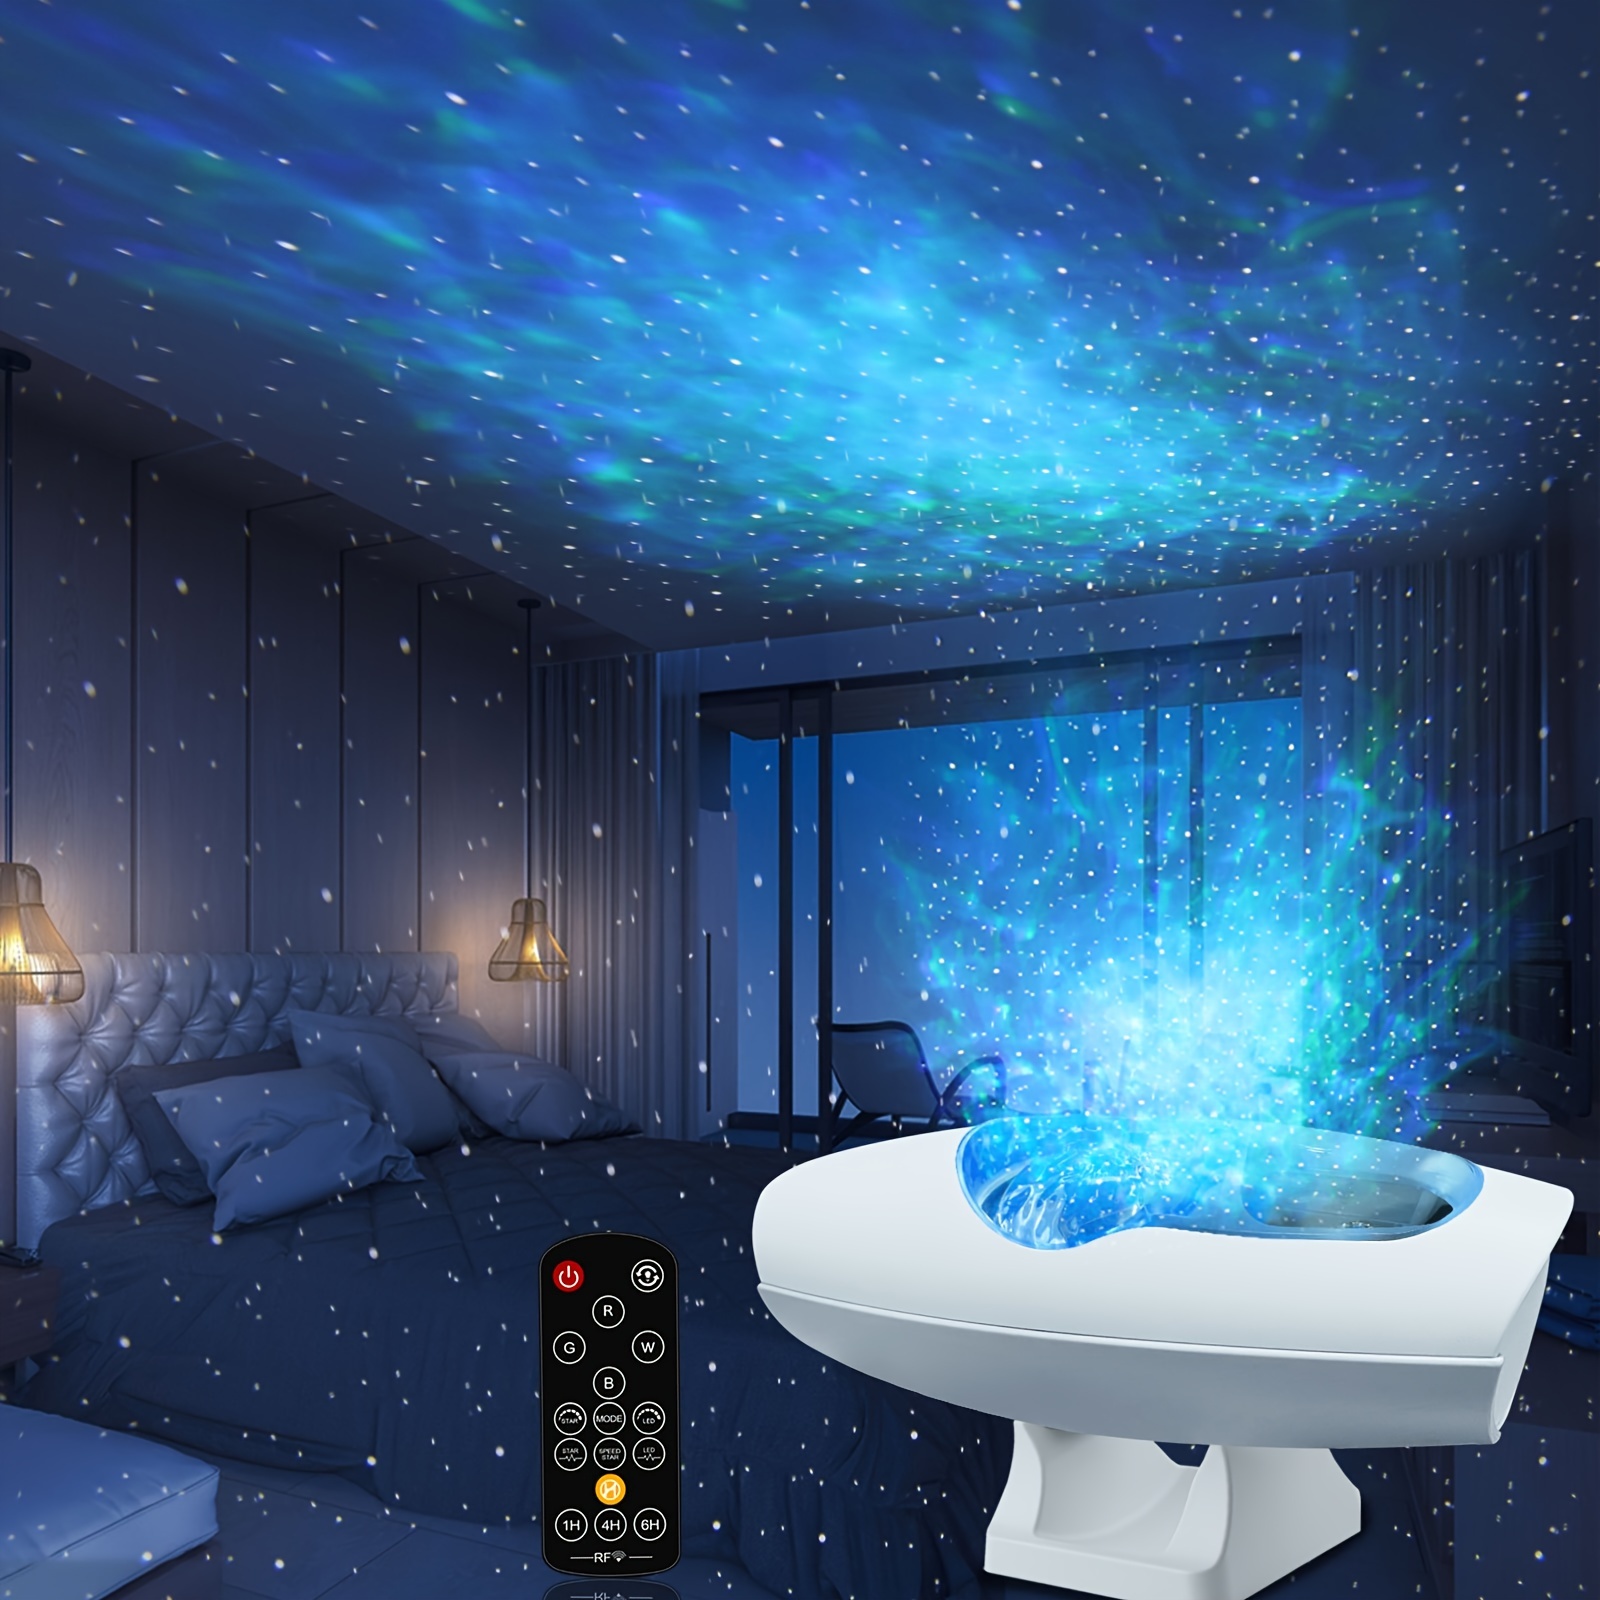 Astronaut Star Light Projector, Nebula Galaxy Projector Night Light, Remote  Control, 4h Auto Close, Voice Control and 360°Rotation Magnetic Head for  Kids Bedroom Decor, Christmas Gifts for Boys Girls : : Electronics